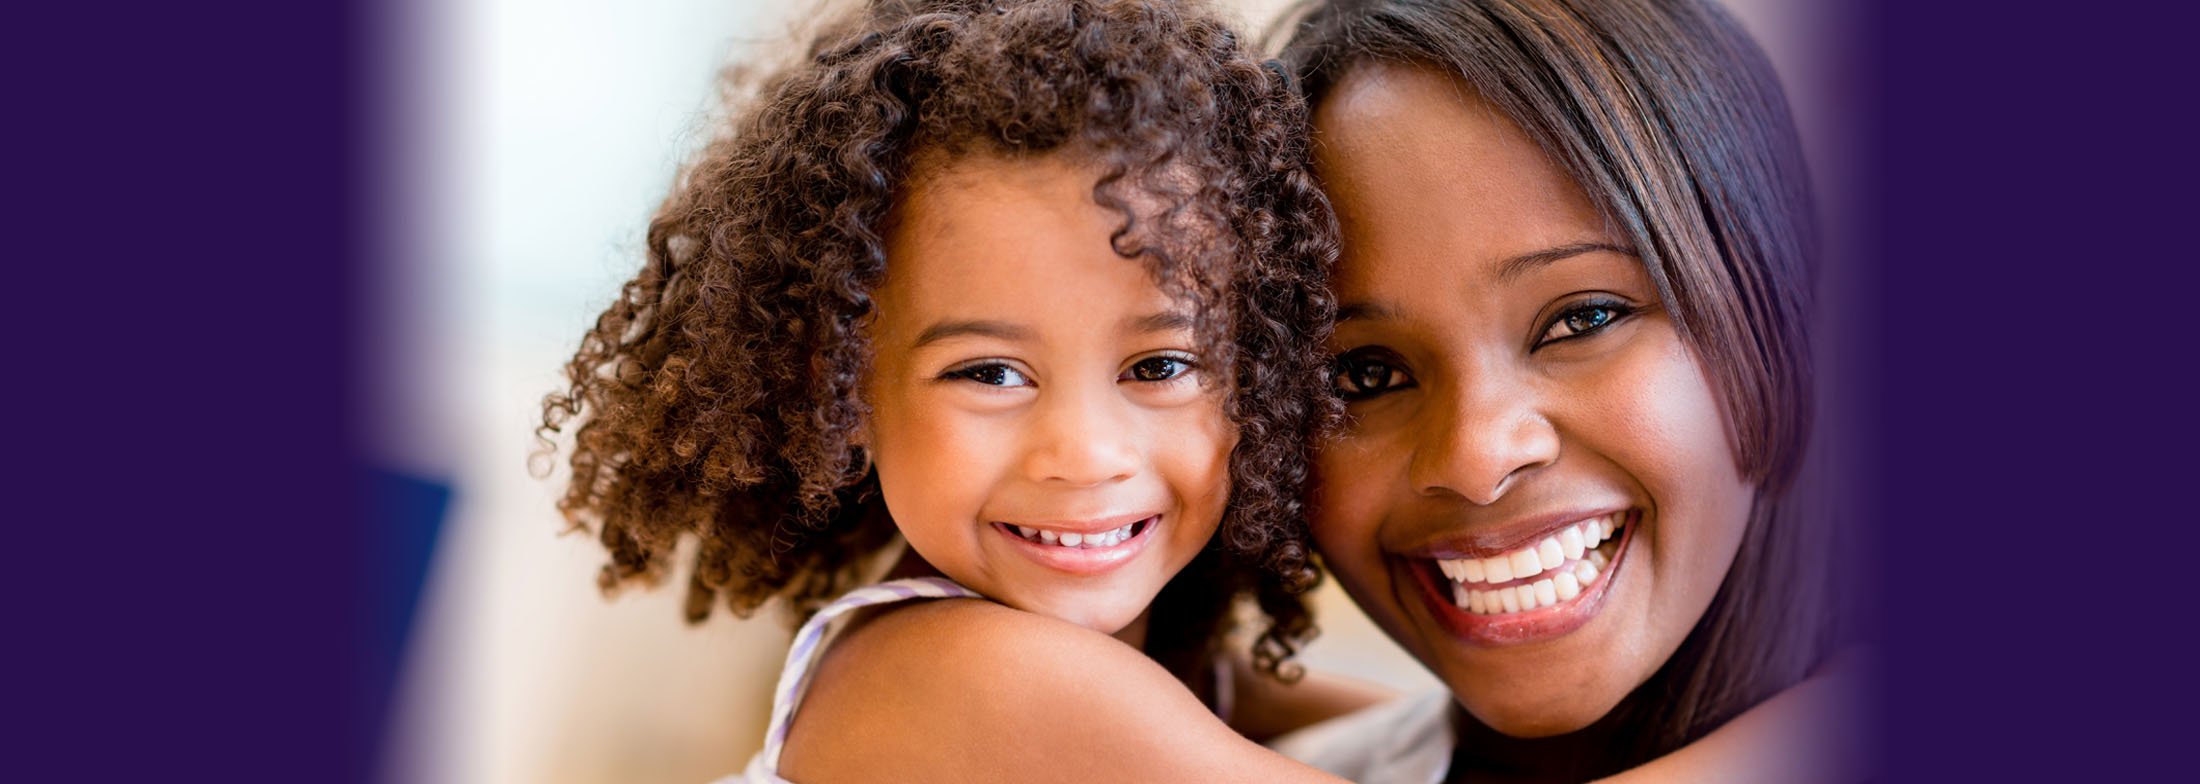 Header image of a mom and her daughter smiling